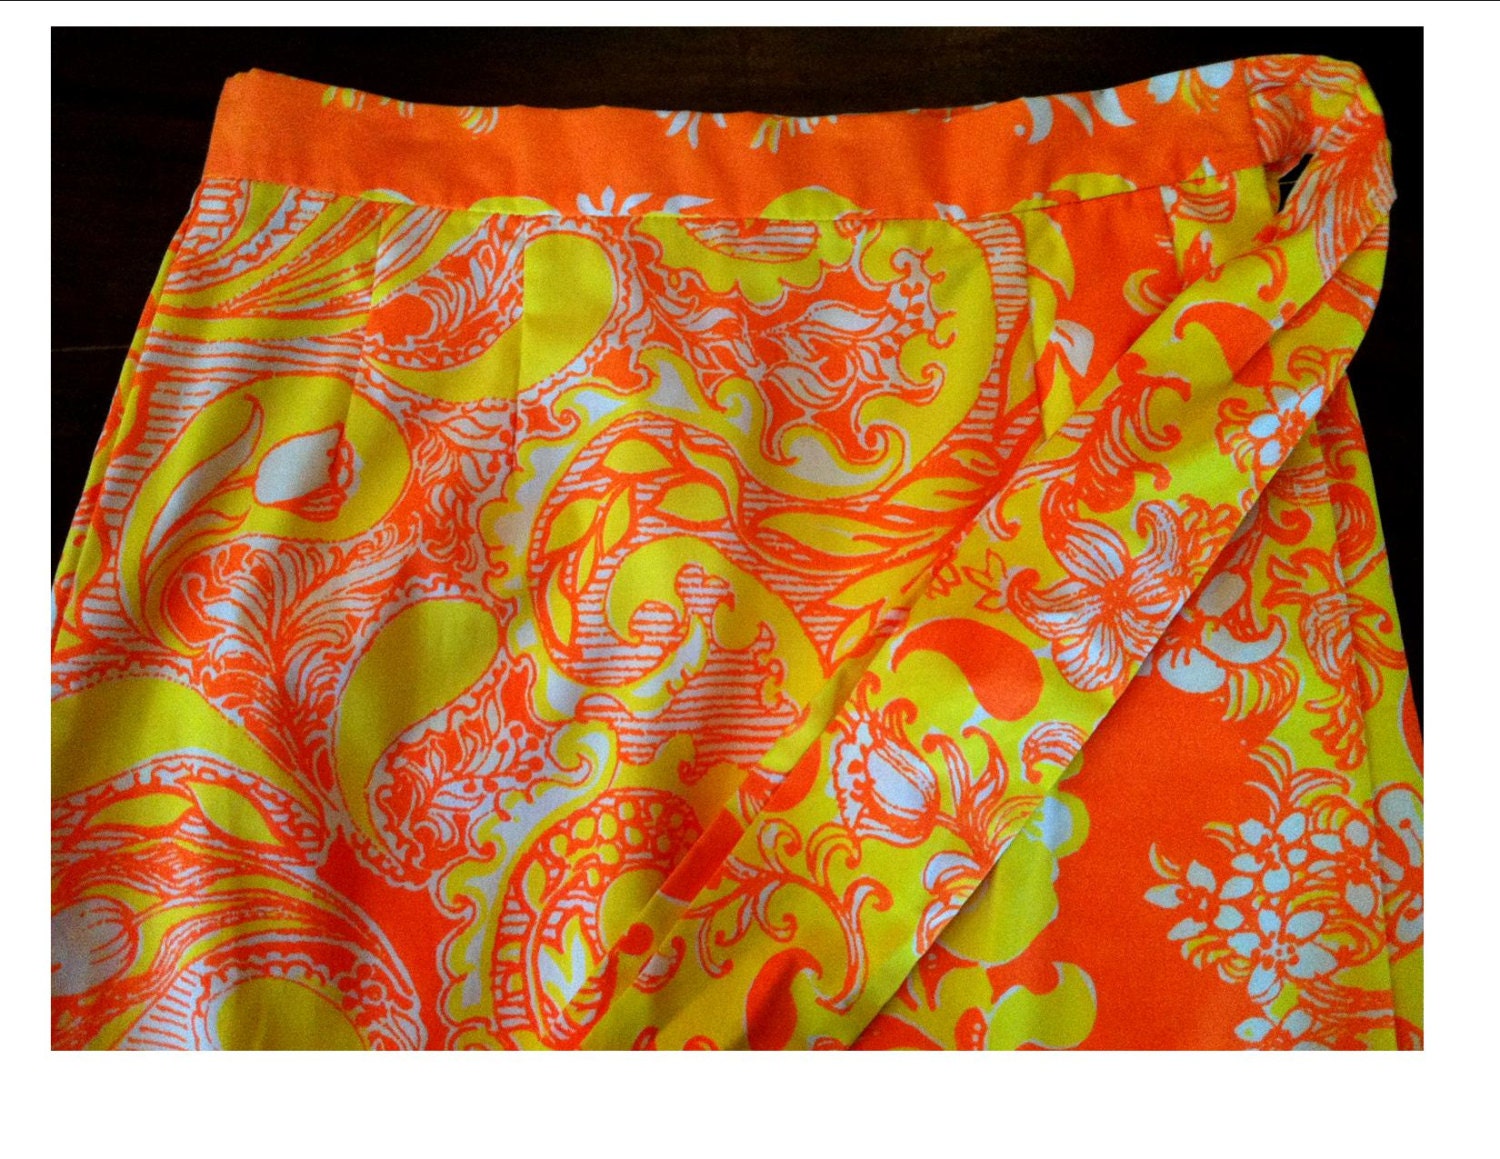 Lilly Pulitzer 1960s Vintage Maxi Skirt Tangerine Dream 60s